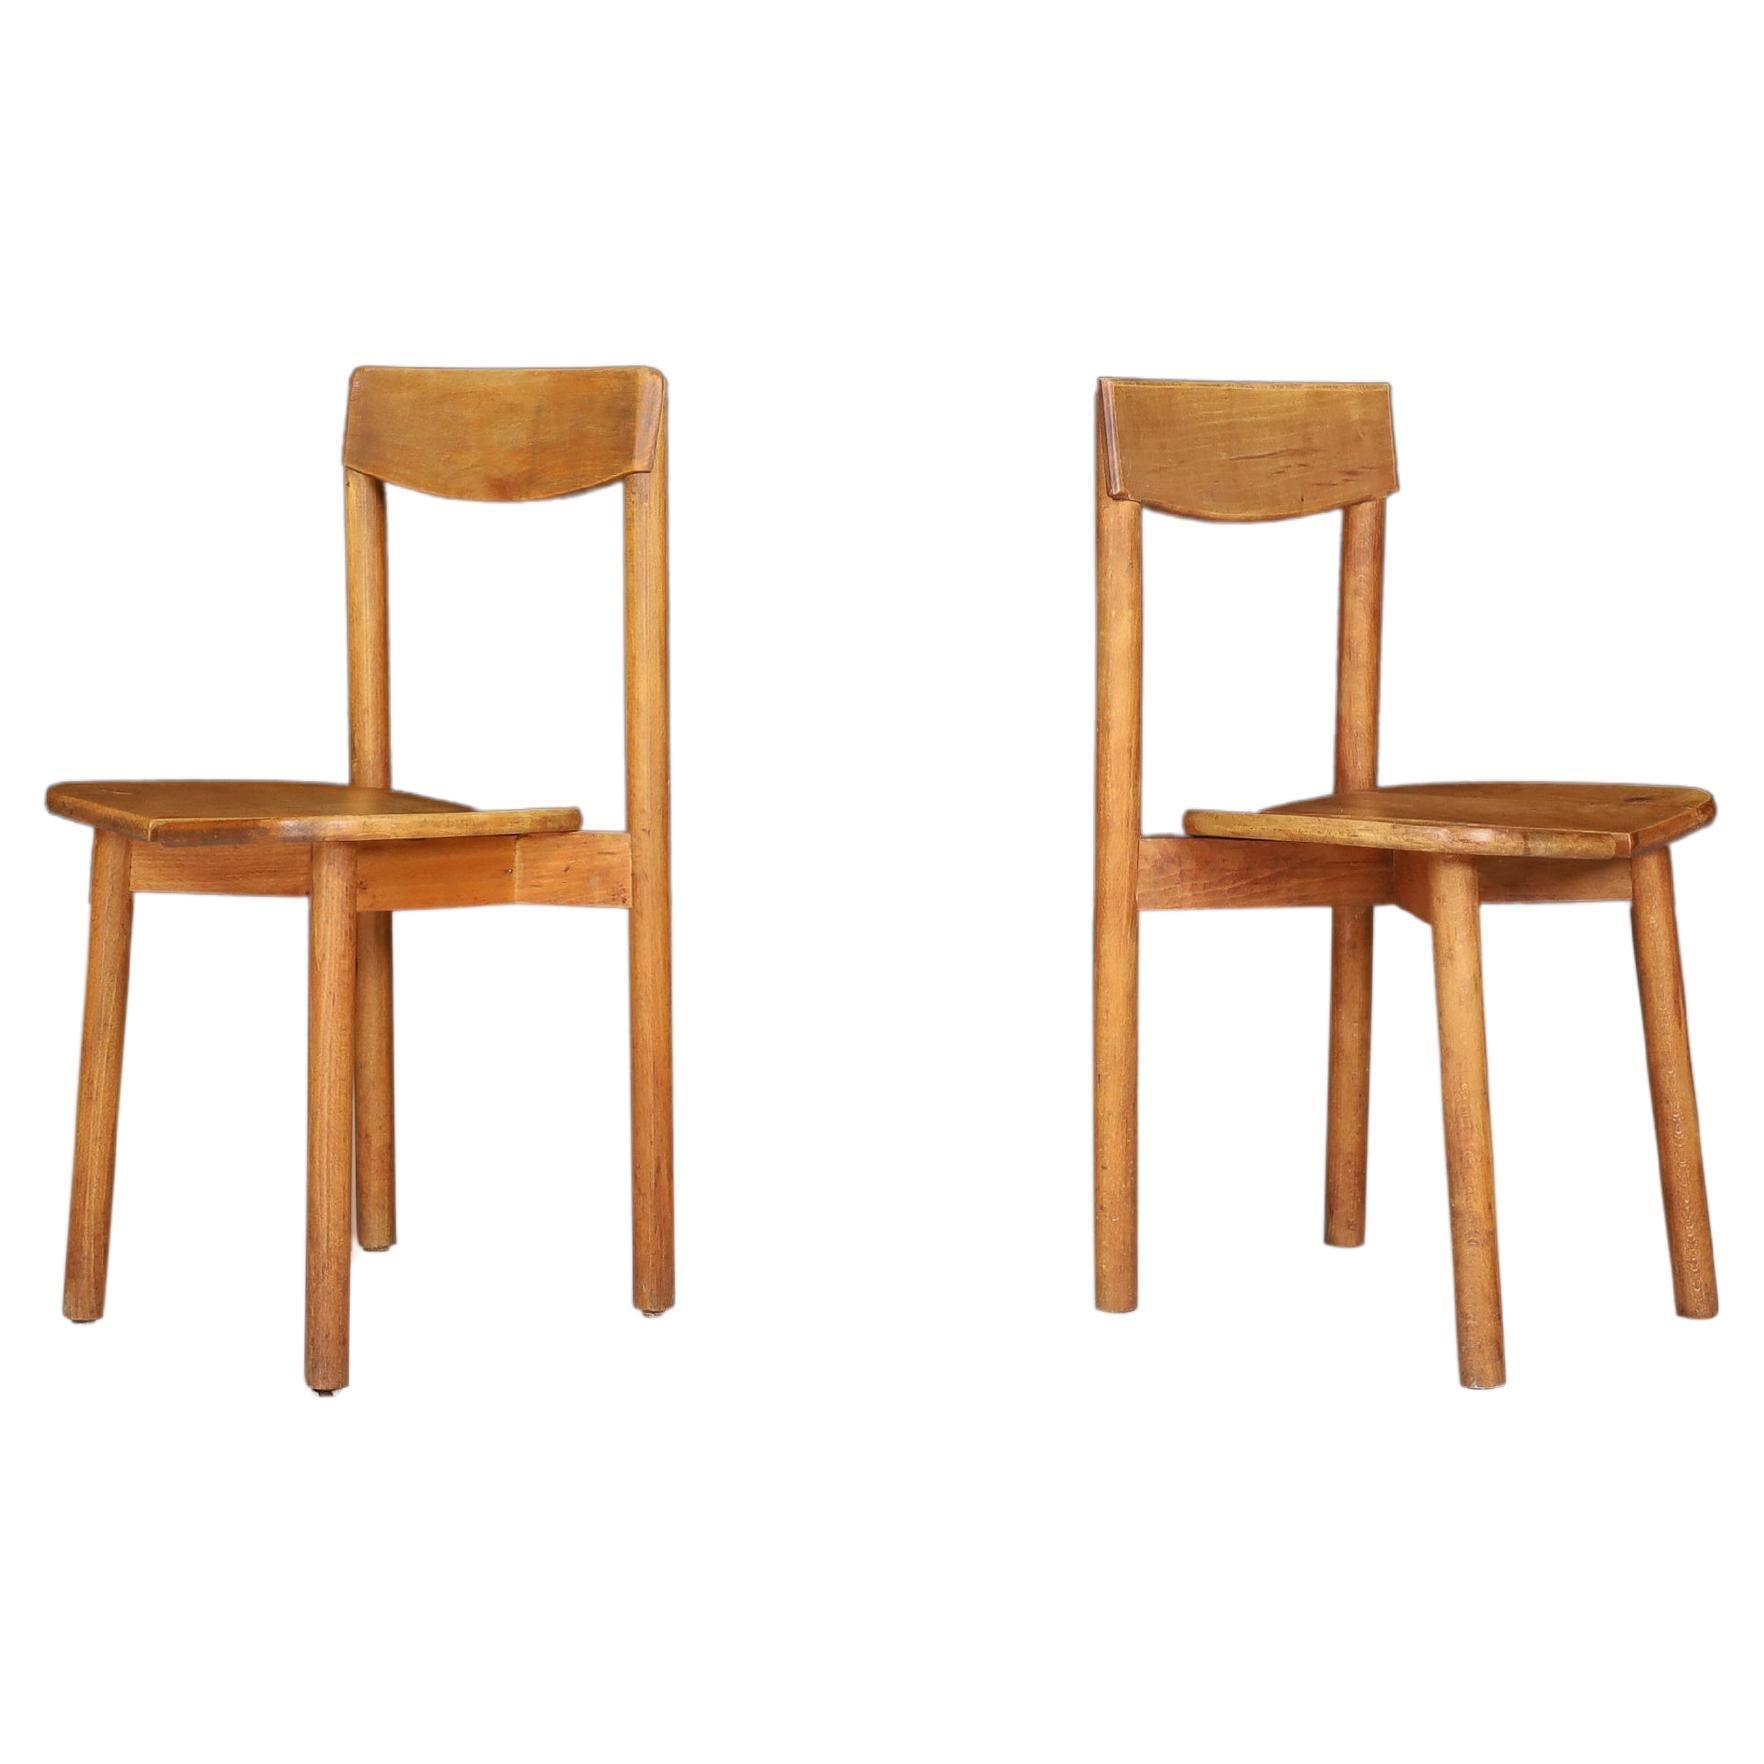 Pierre Gautier Solid Beech Chairs, France, 1960s For Sale